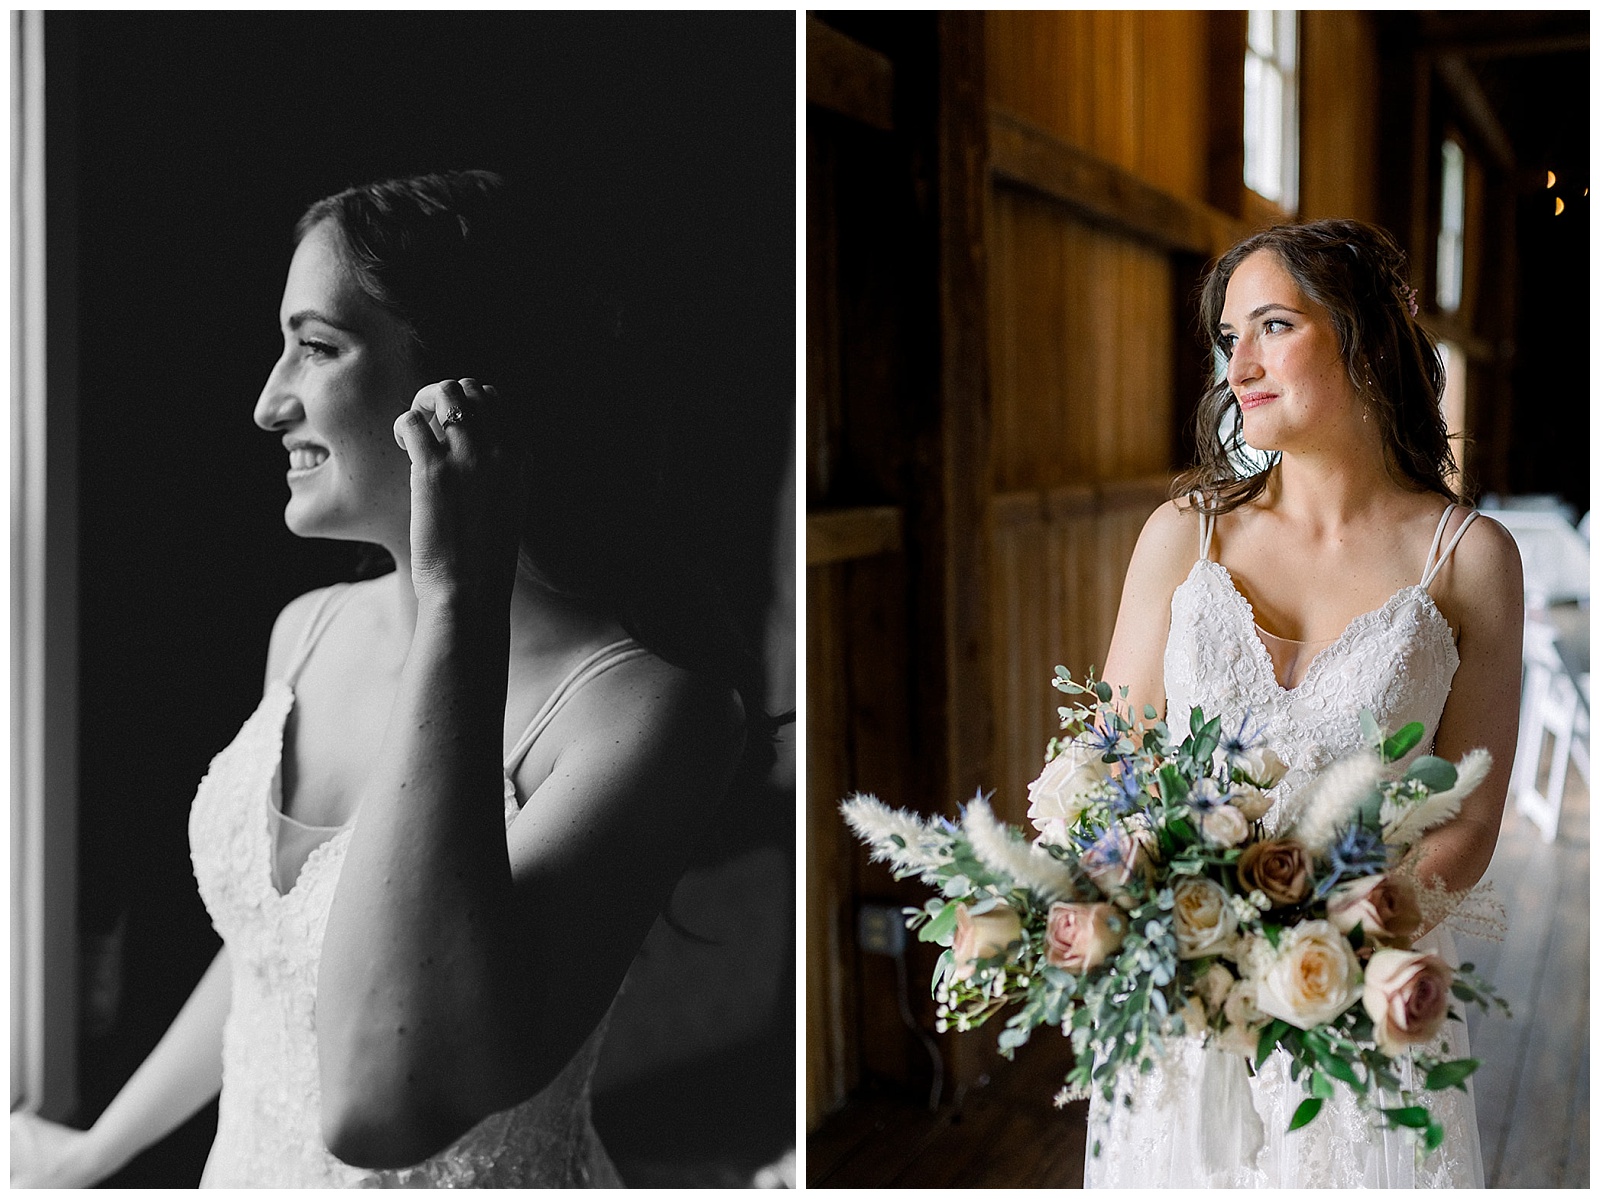 bride poses for a portrait by the window at lakefield weddings, a modern barn wedding venue